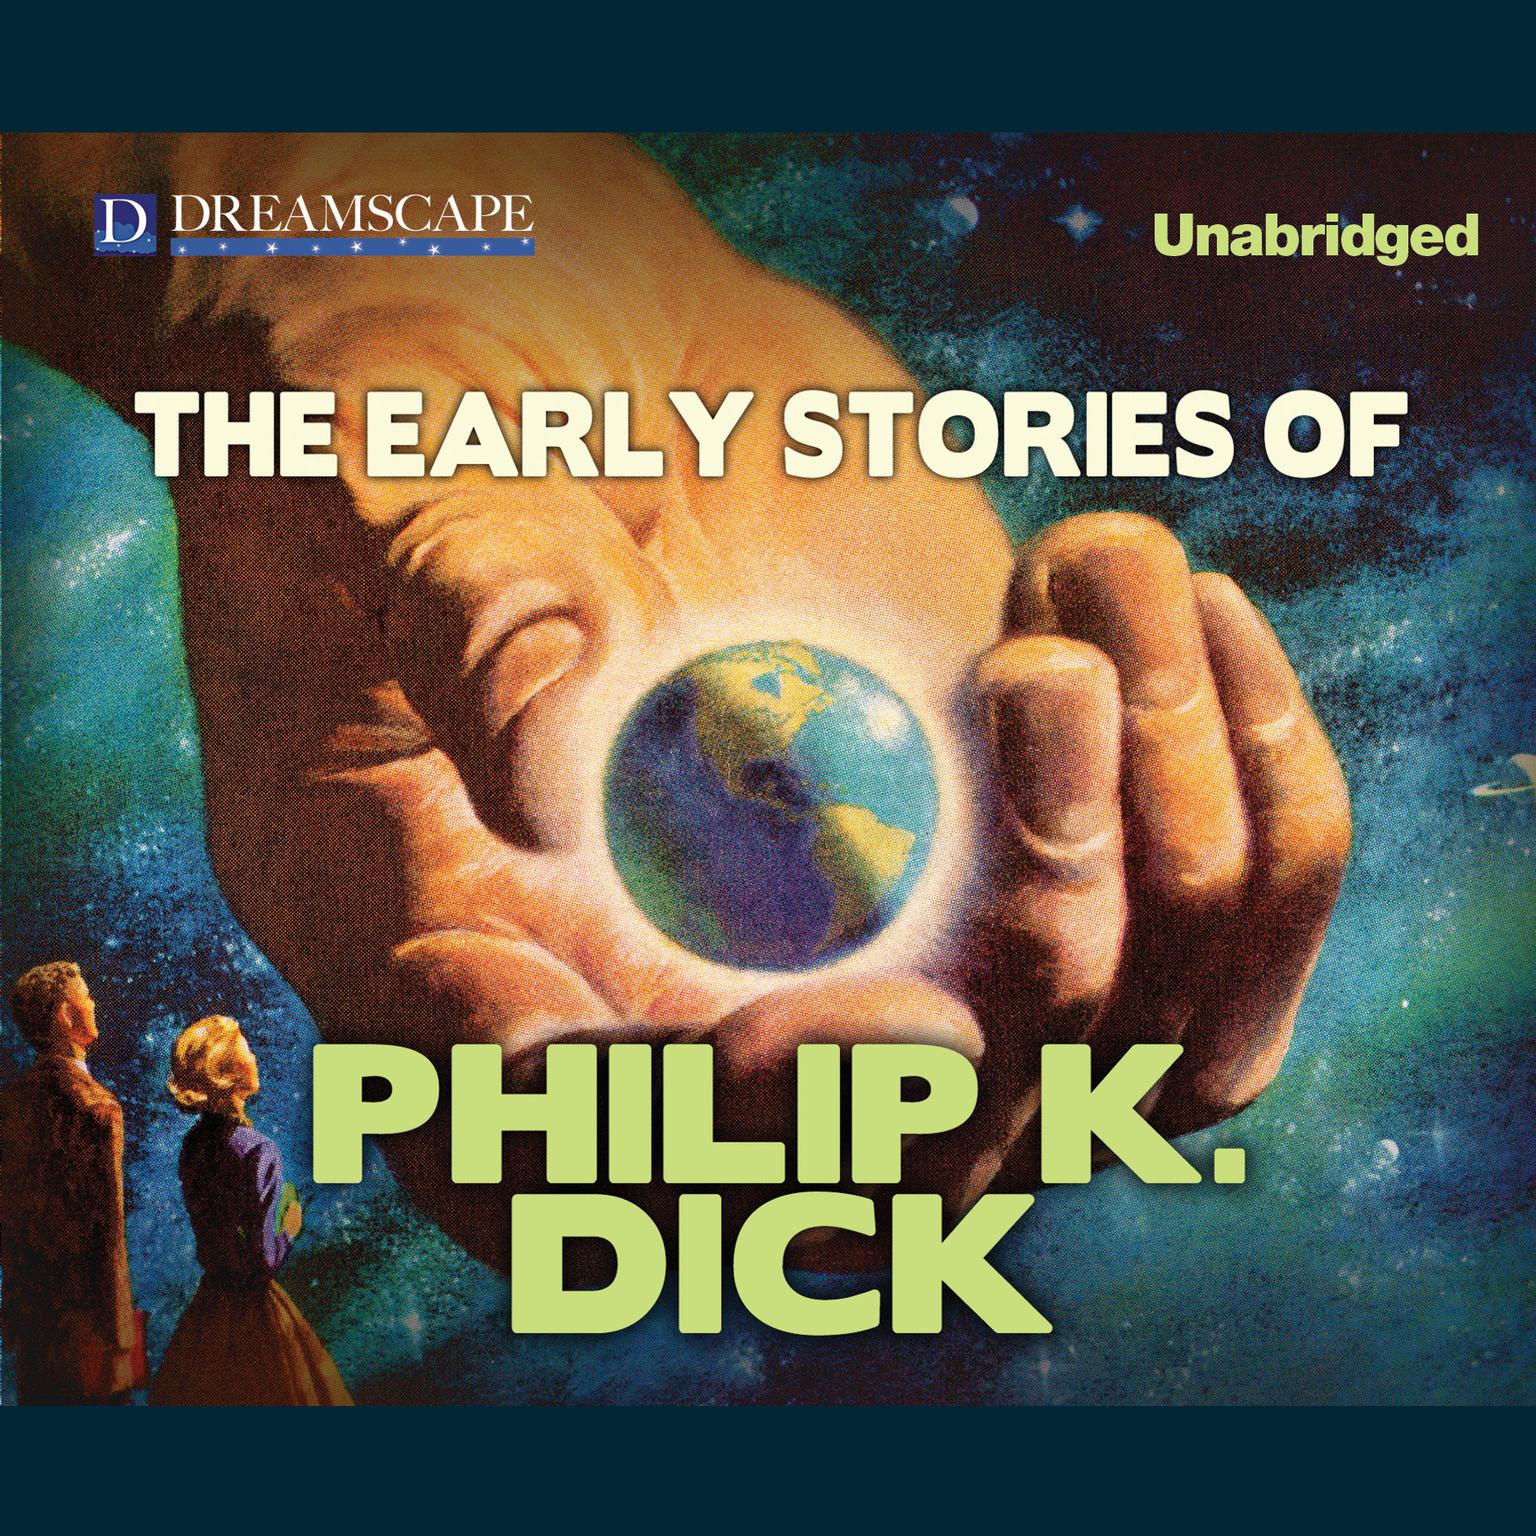 The Early Stories of Philip K. Dick Audiobook, by Philip K. Dick